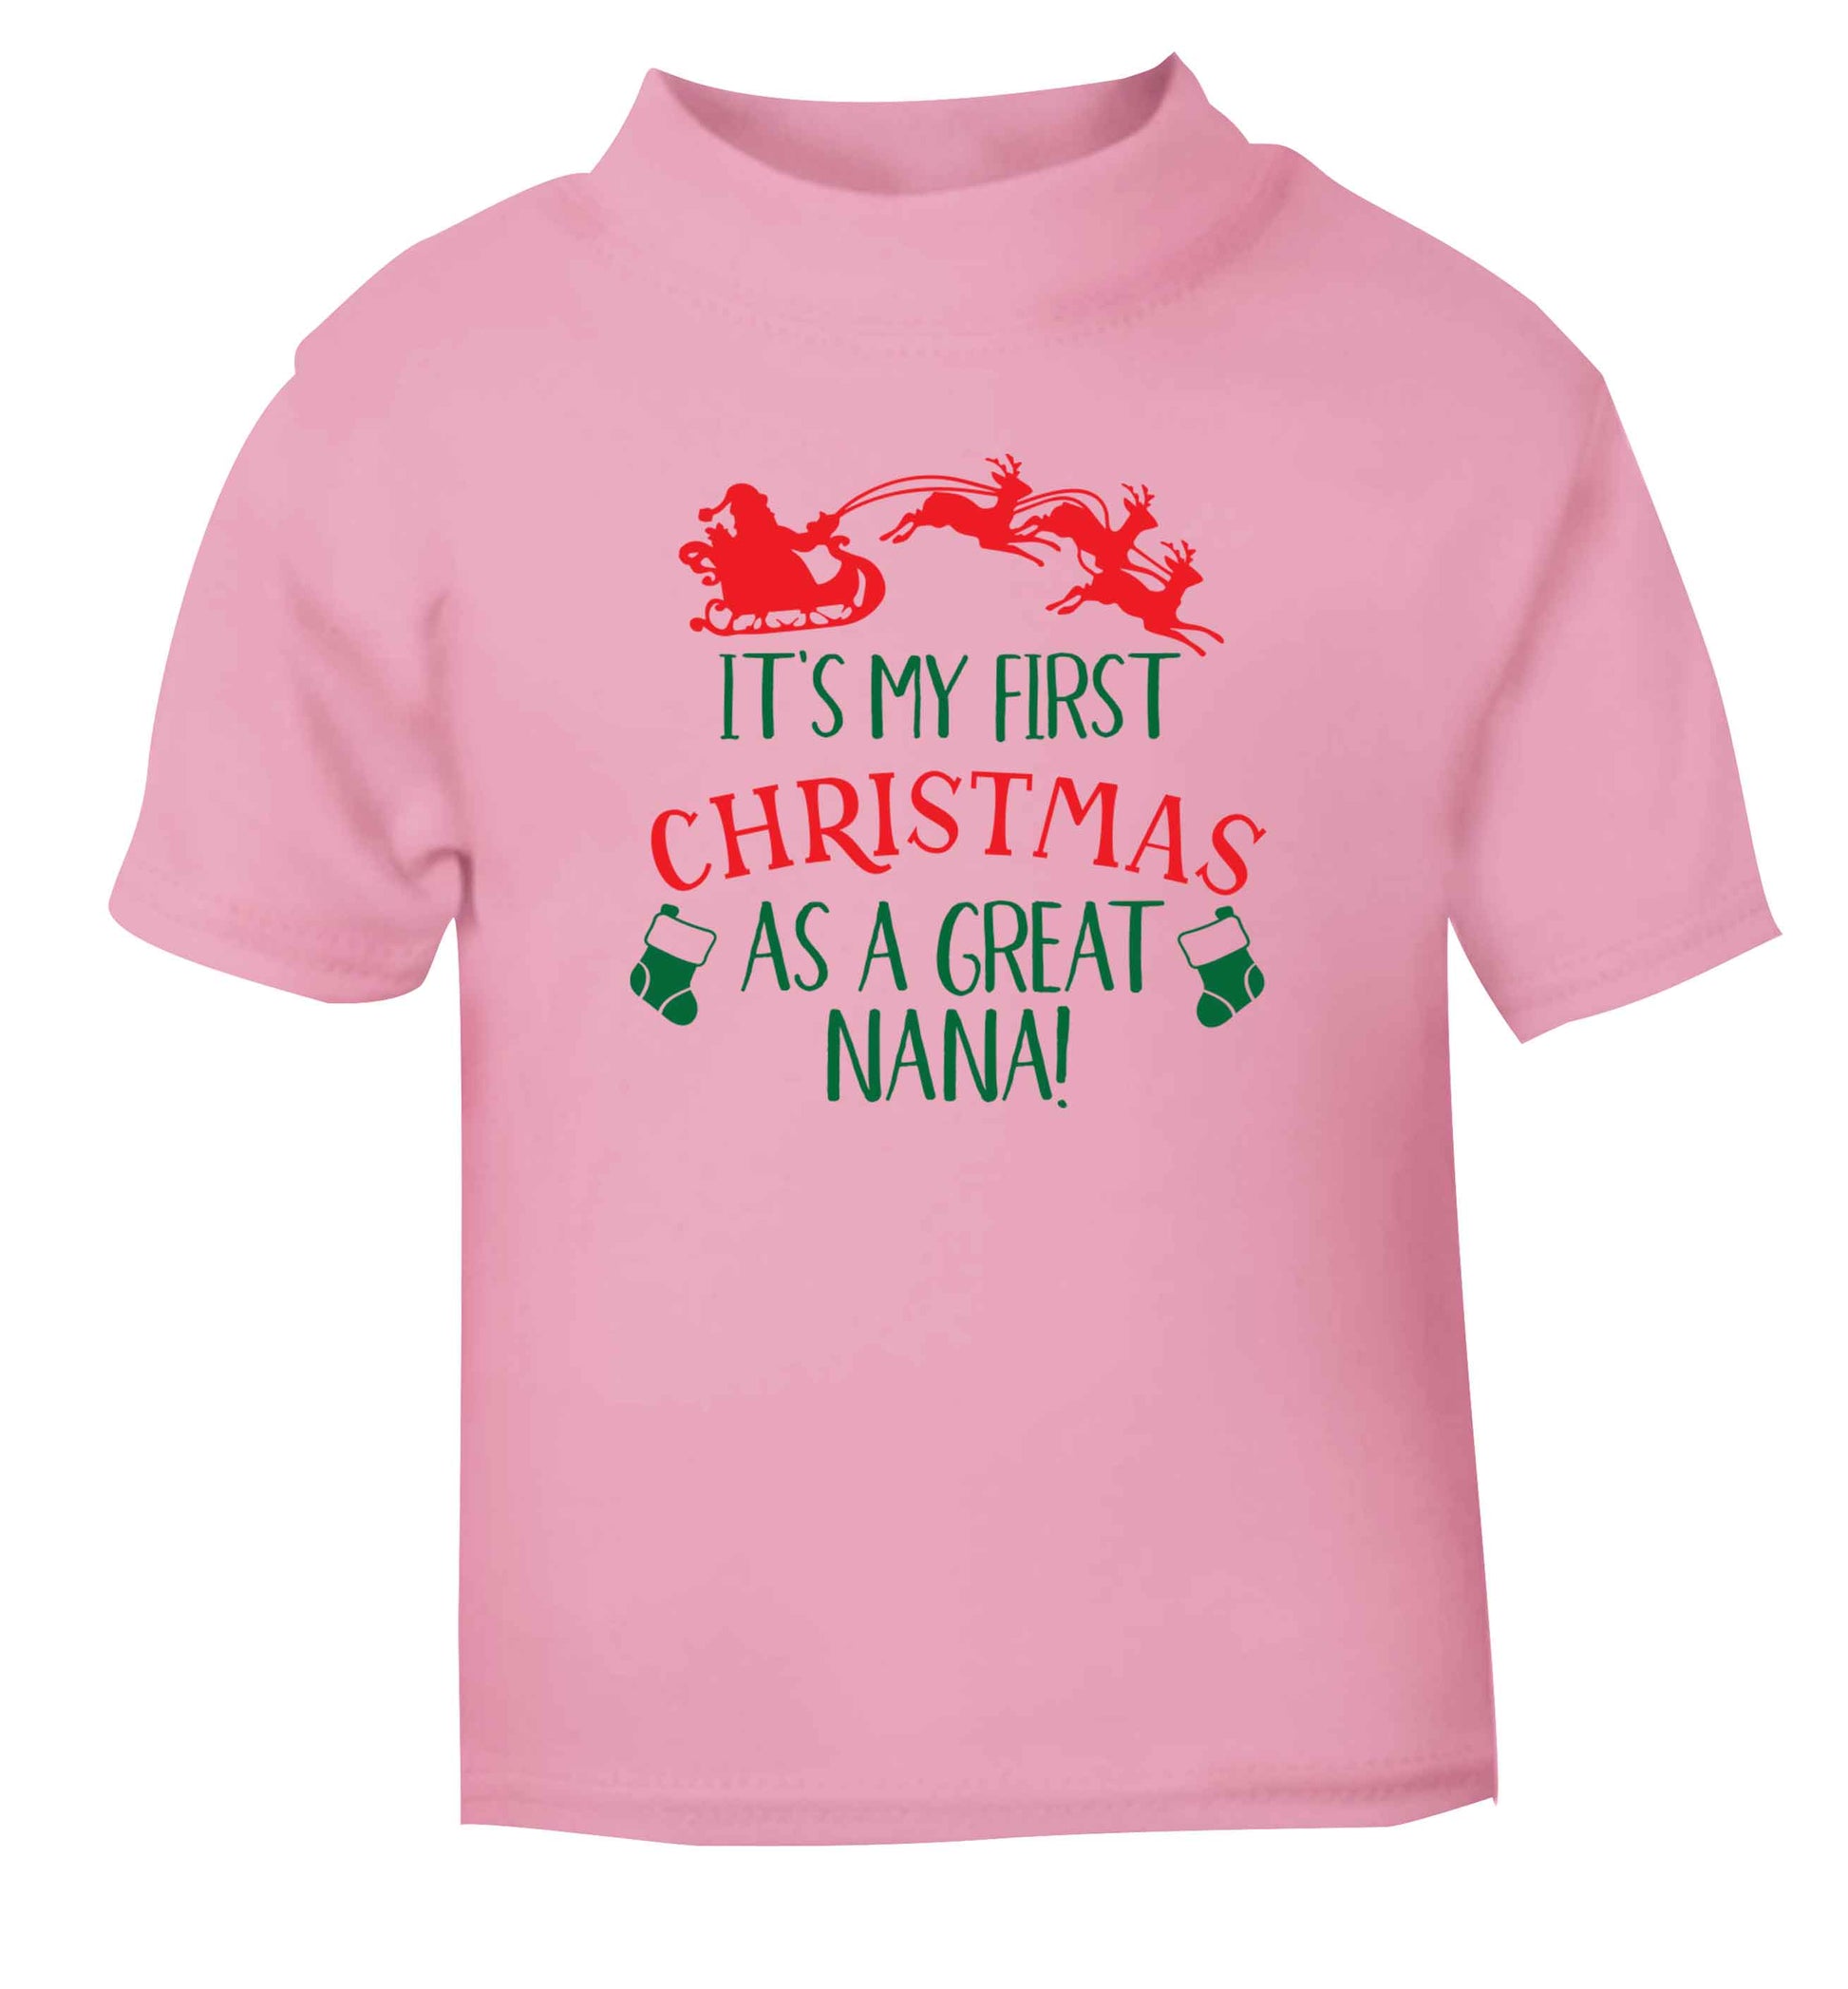 It's my first Christmas as a great nana! light pink Baby Toddler Tshirt 2 Years